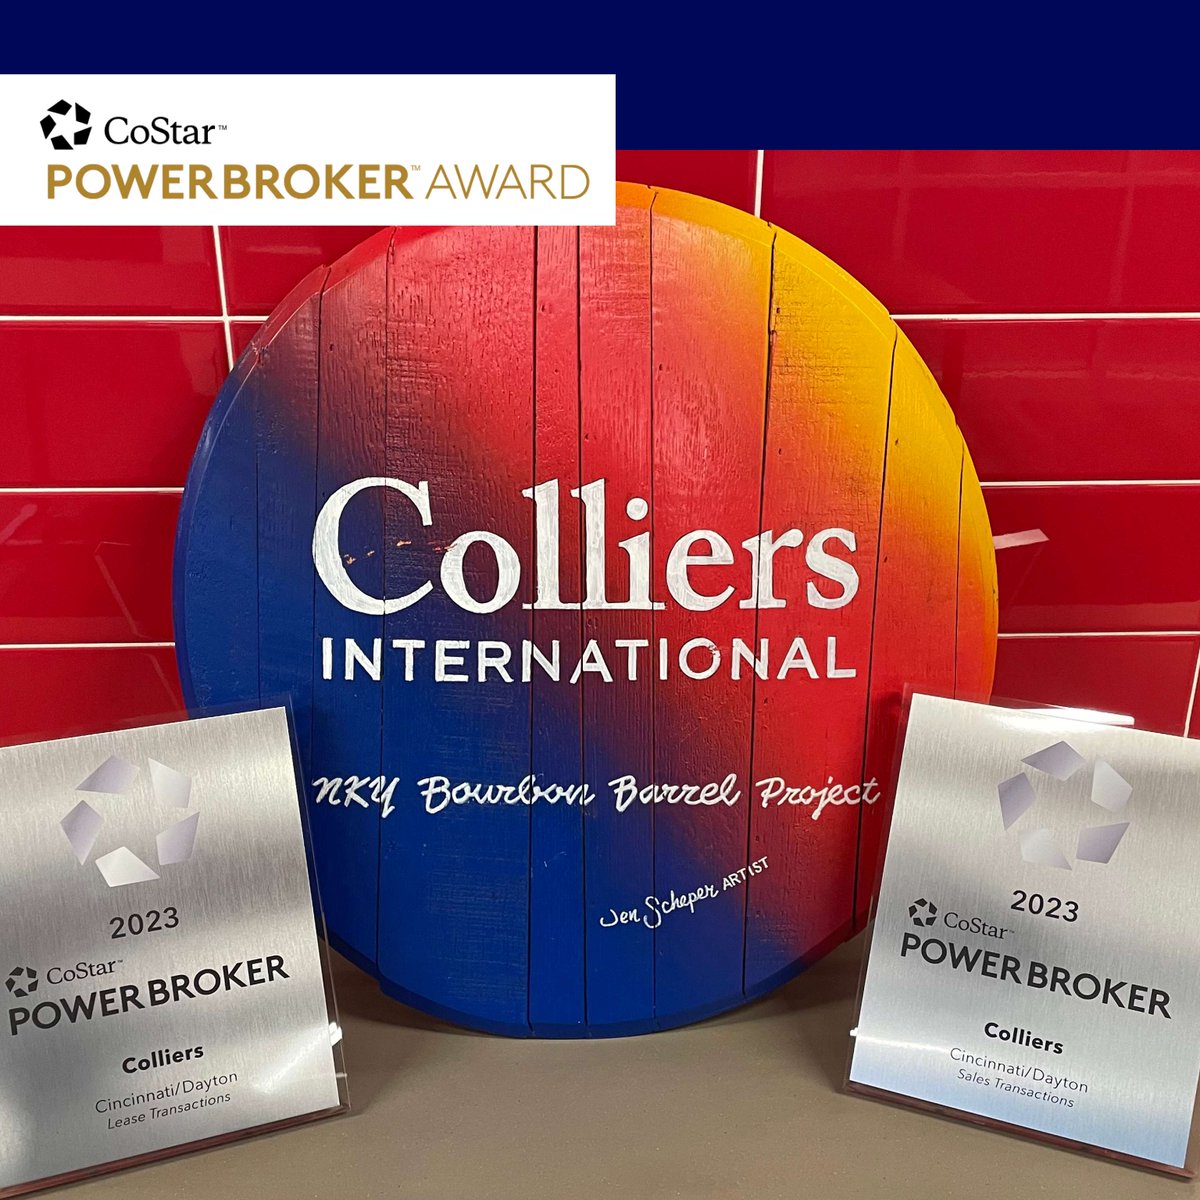 Our teams have snagged the 2023 CoStar POWERBROKER Awards for Cincinnati/Dayton Lease and Sale Transactions! Swing by our office to check out these accolades. Big shoutout to our amazing teams for their outstanding achievement! 🌟